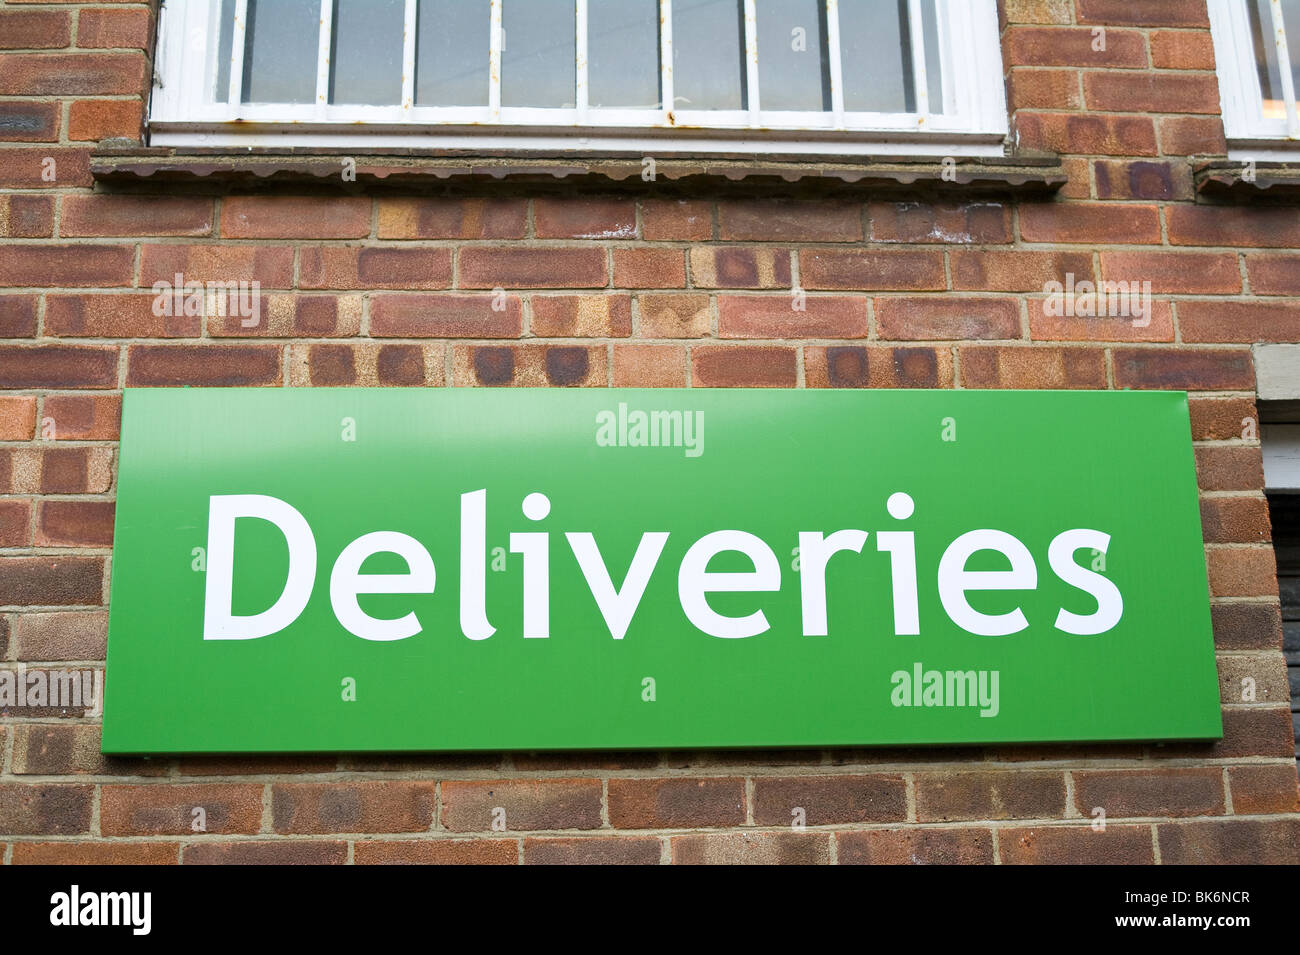 Deliveries Sign at Rear of Shop Stock Photo